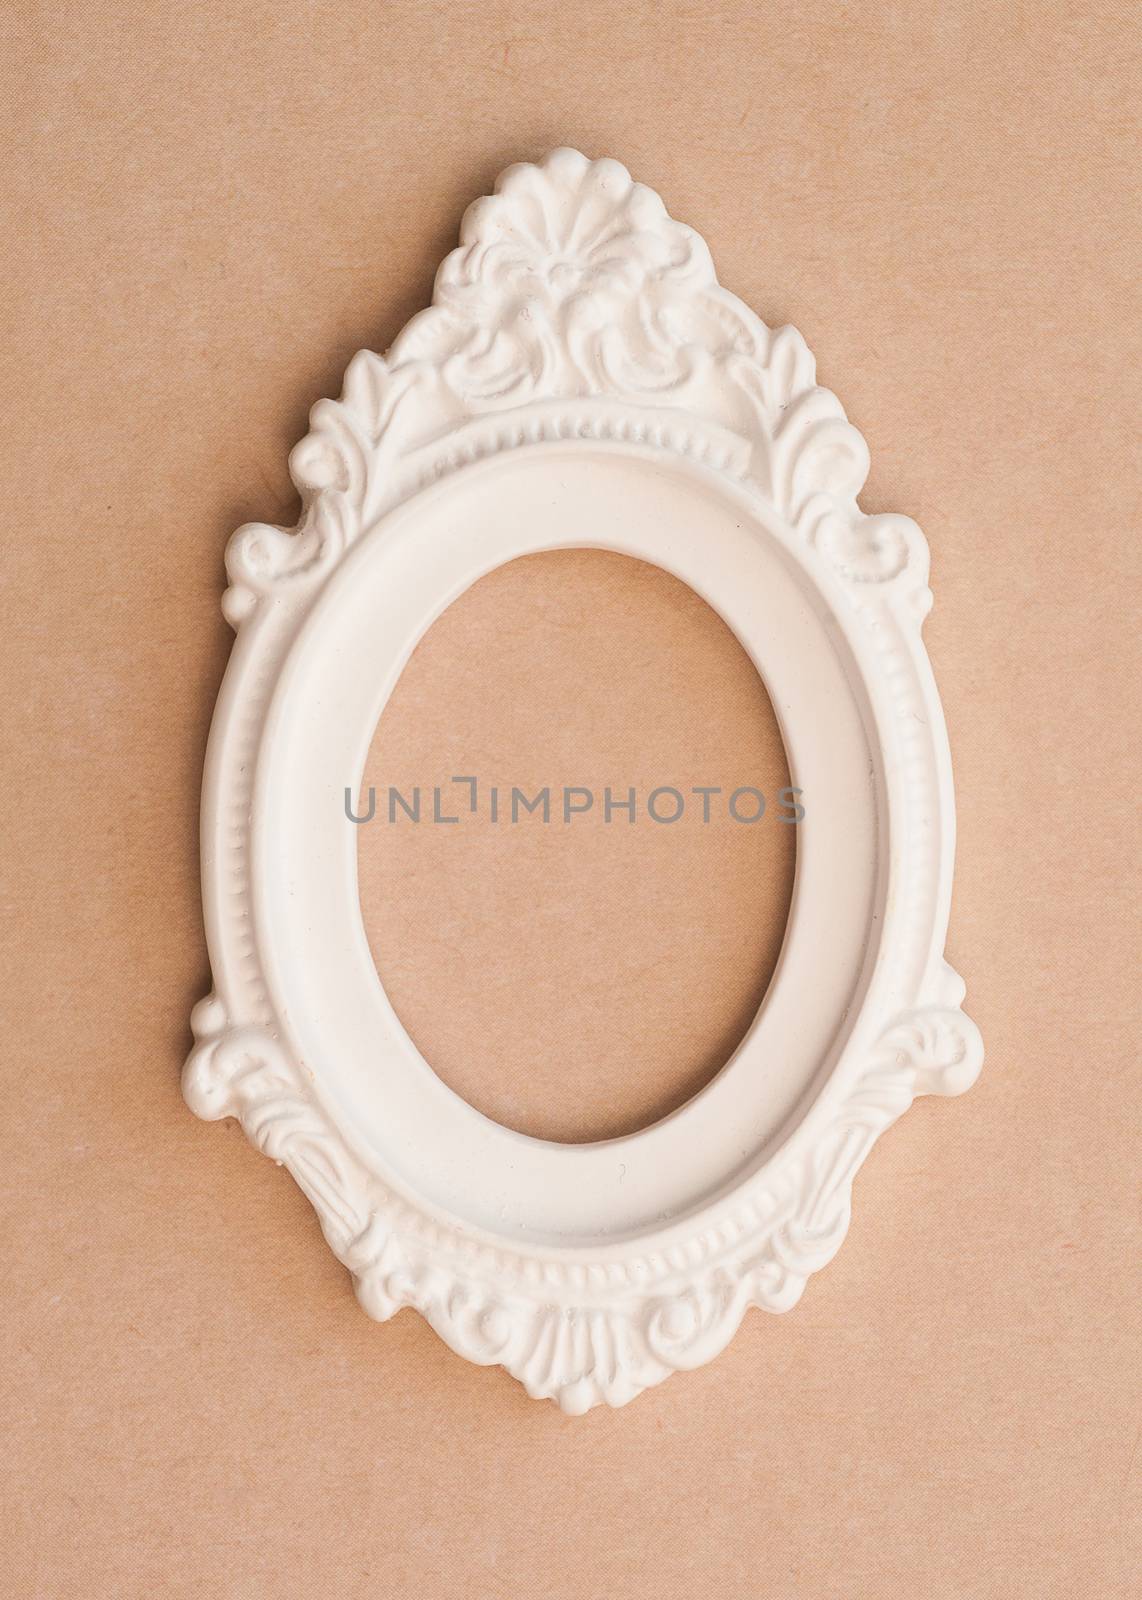 decorative vintage photo frame and place for text by timonko